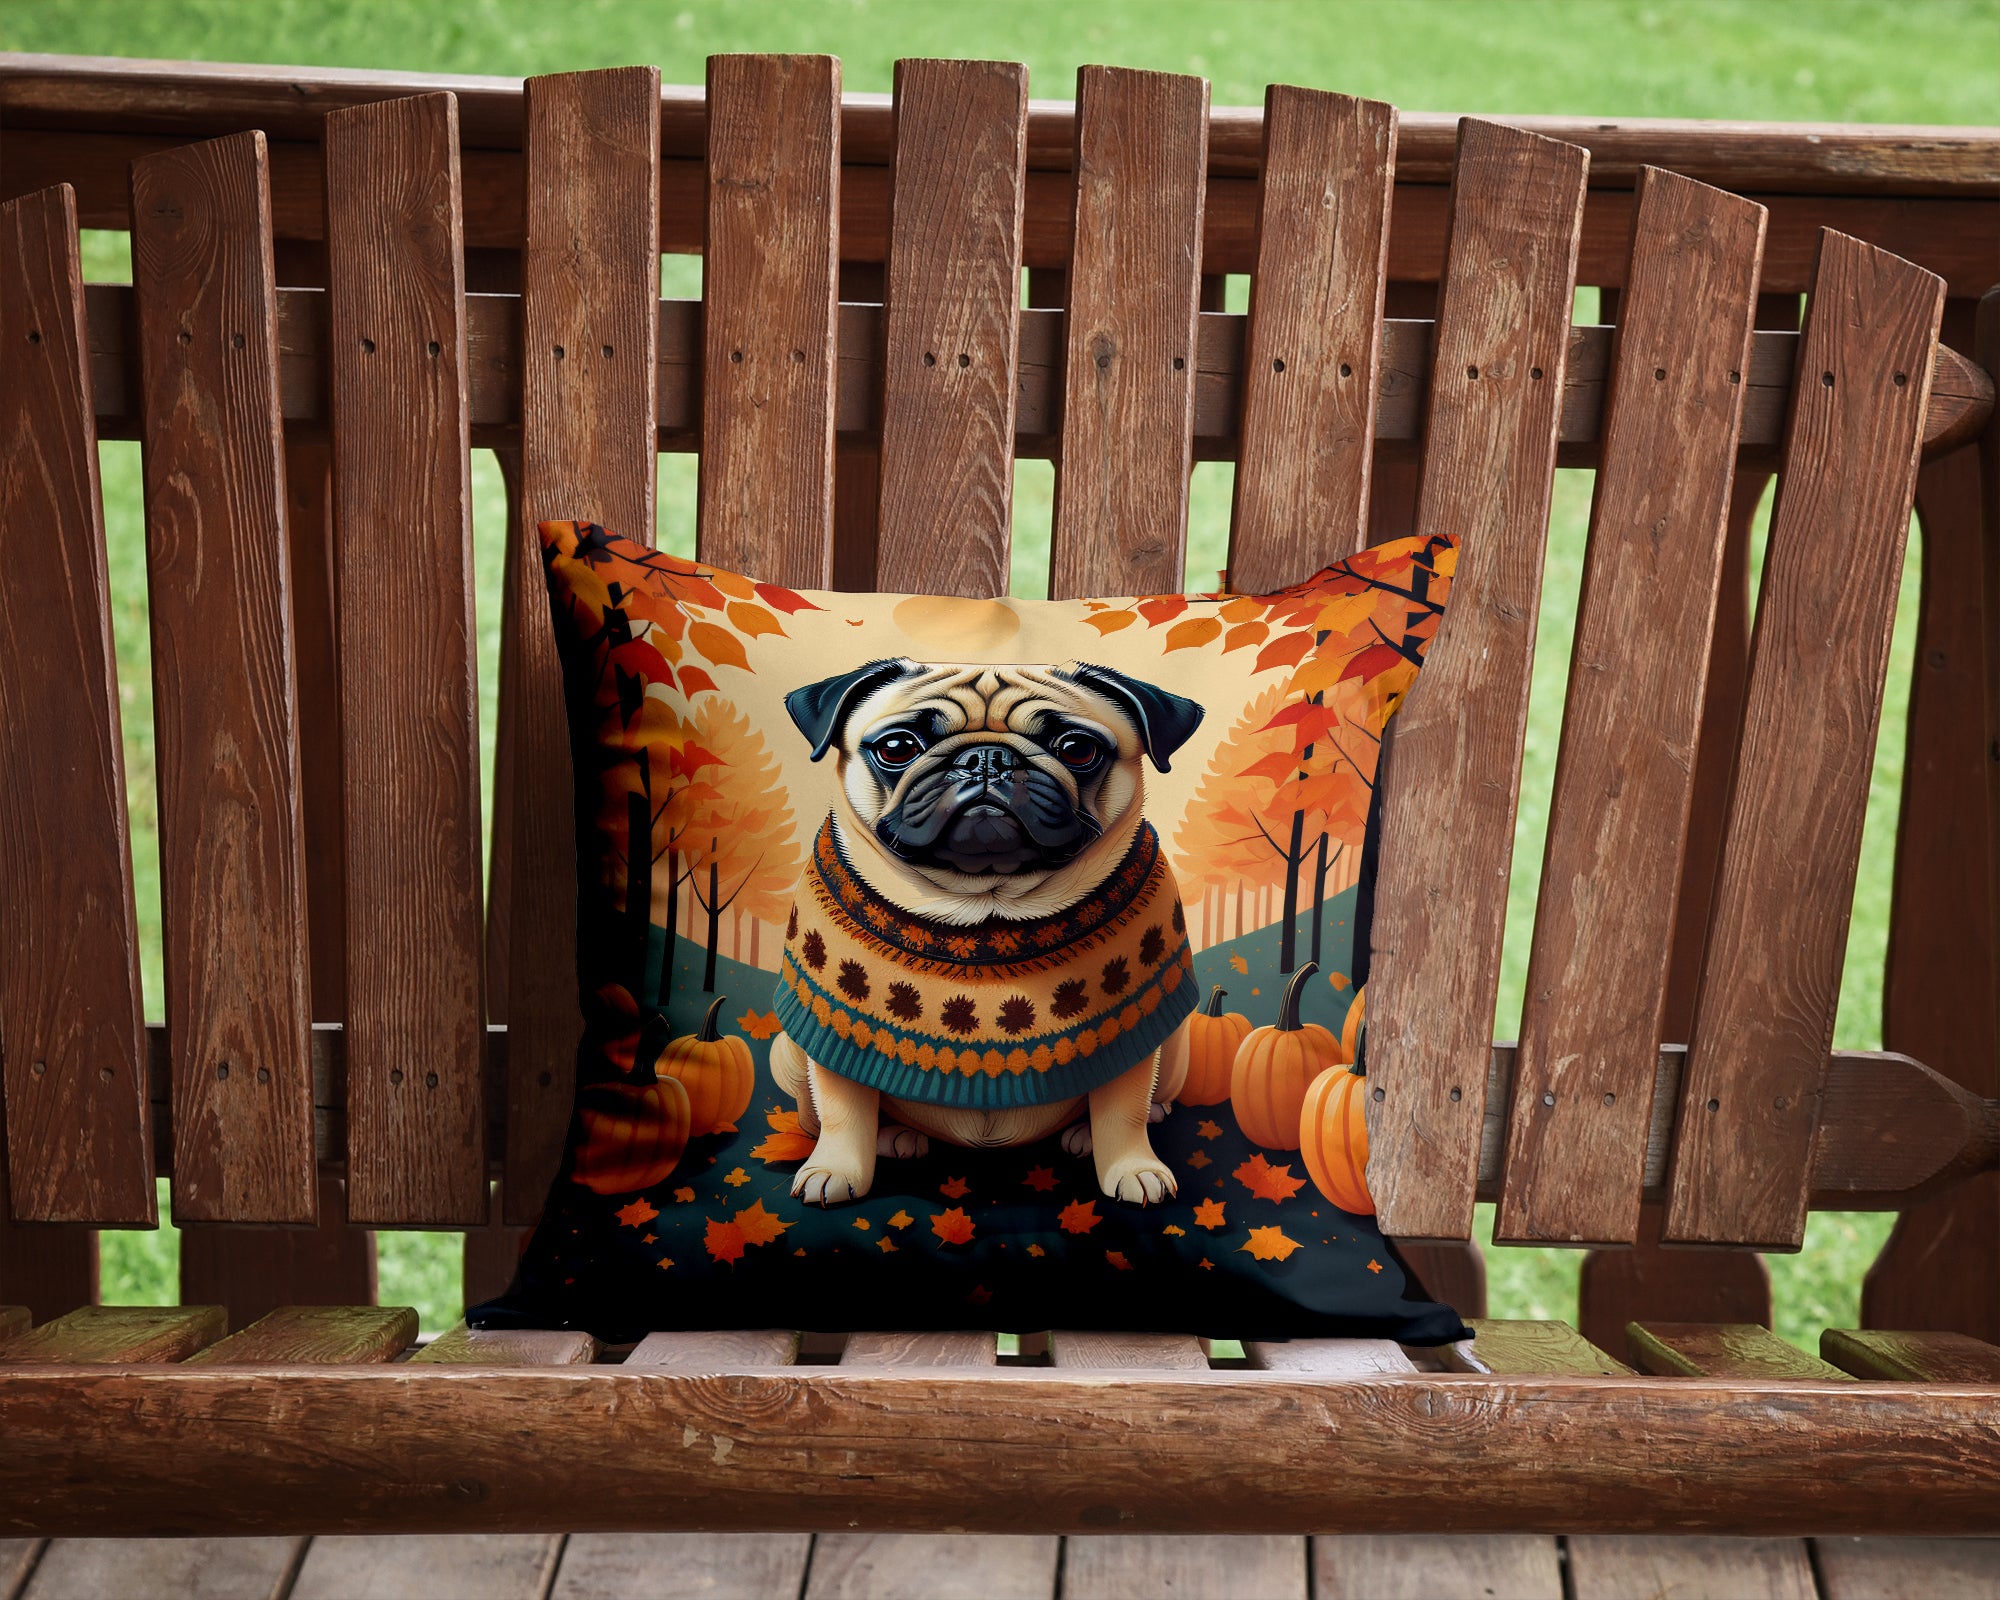 Buy this Fawn Pug Fall Fabric Decorative Pillow